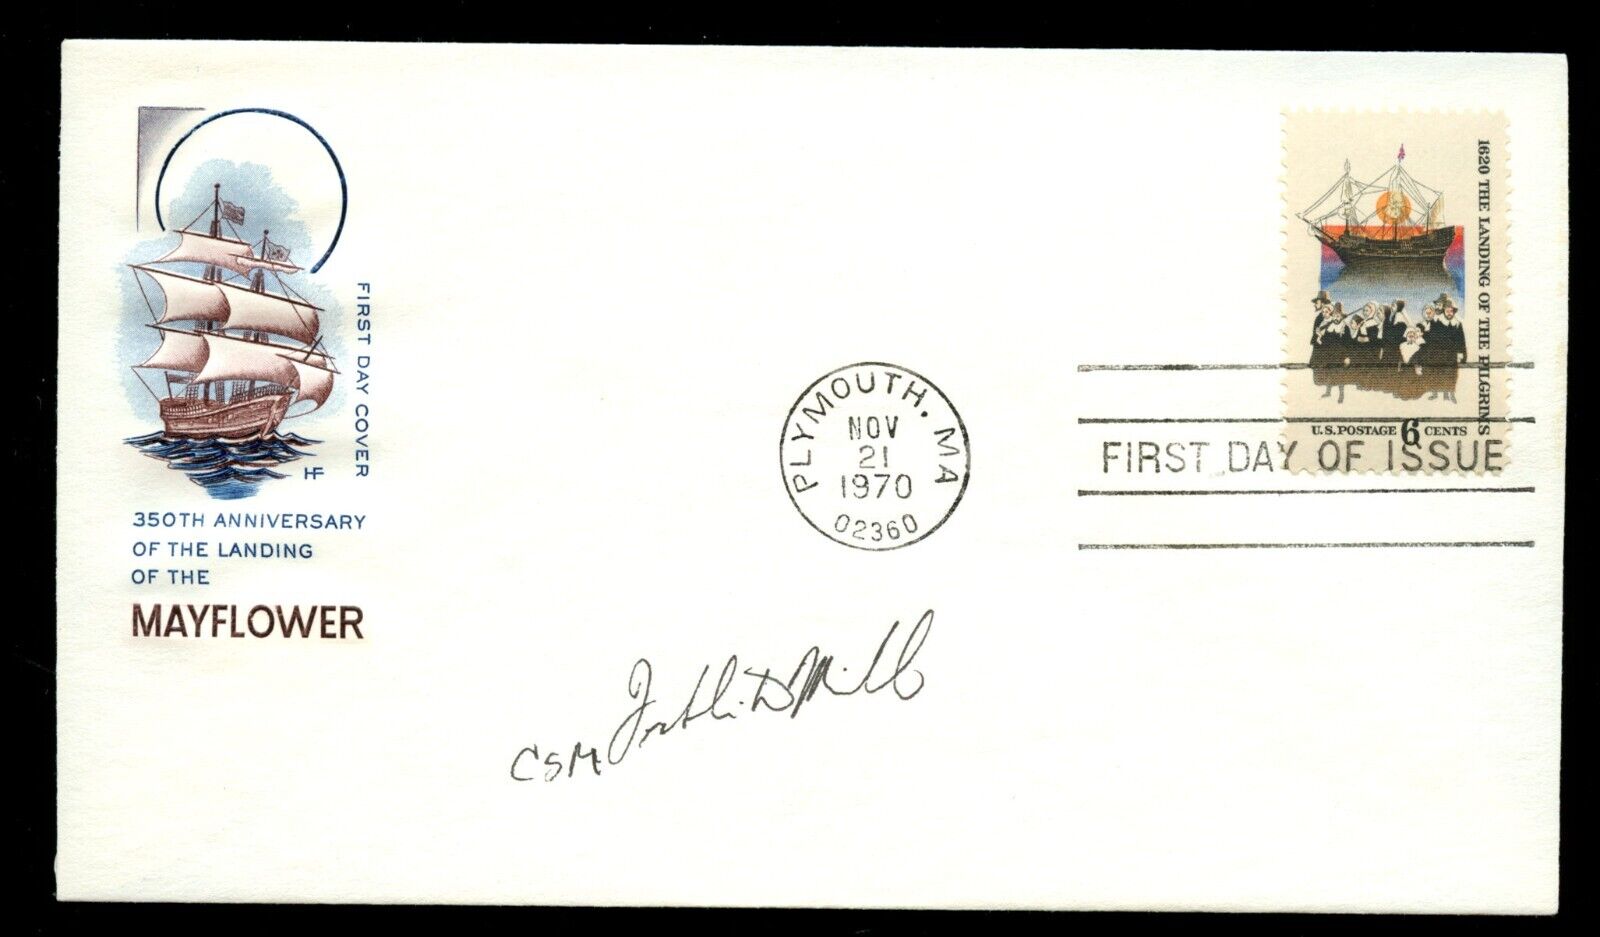 Franklin D Miller d2000 signed auto FDC Medal of Honor Recipient US Army Vietnam